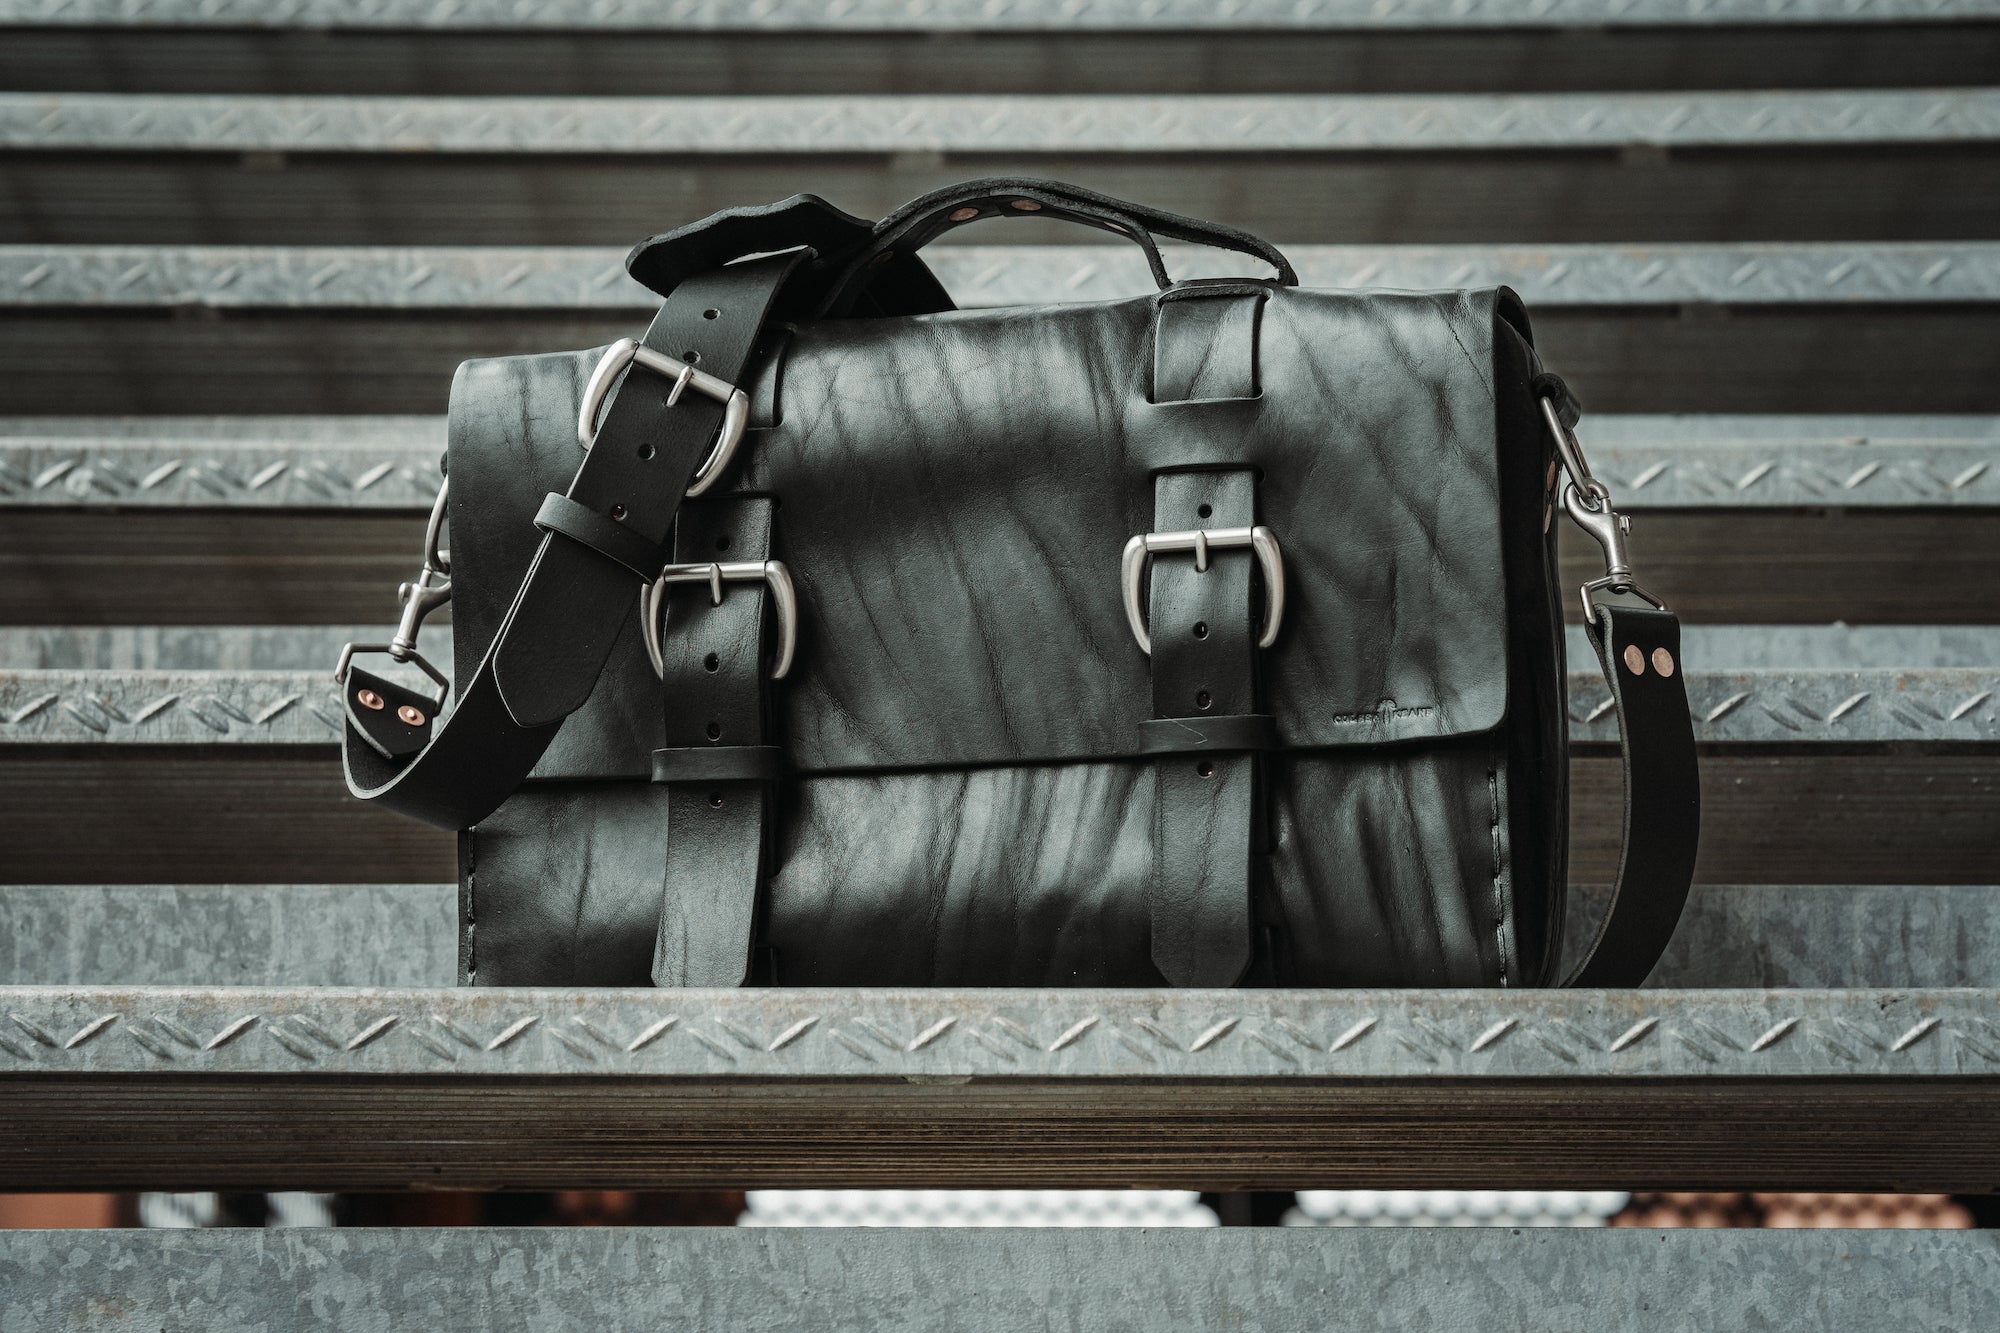 Limited Edition No. 4313 - Minimalist Standard Leather Satchel in Commonwealth Black - 5 MADE, ONLY 3 LEFT